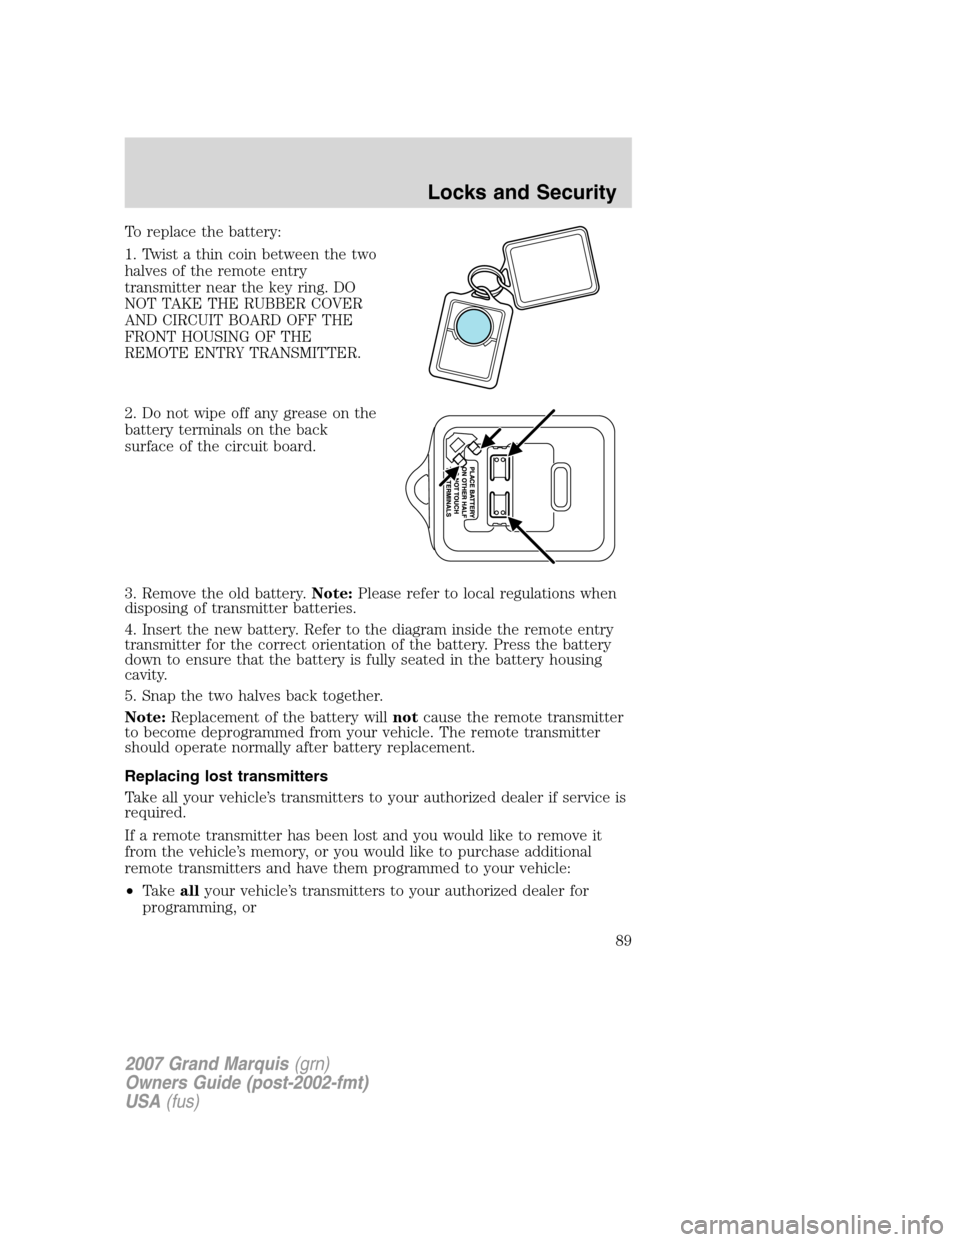 Mercury Grand Marquis 2007  Owners Manuals To replace the battery:
1. Twist a thin coin between the two
halves of the remote entry
transmitter near the key ring. DO
NOT TAKE THE RUBBER COVER
AND CIRCUIT BOARD OFF THE
FRONT HOUSING OF THE
REMOT